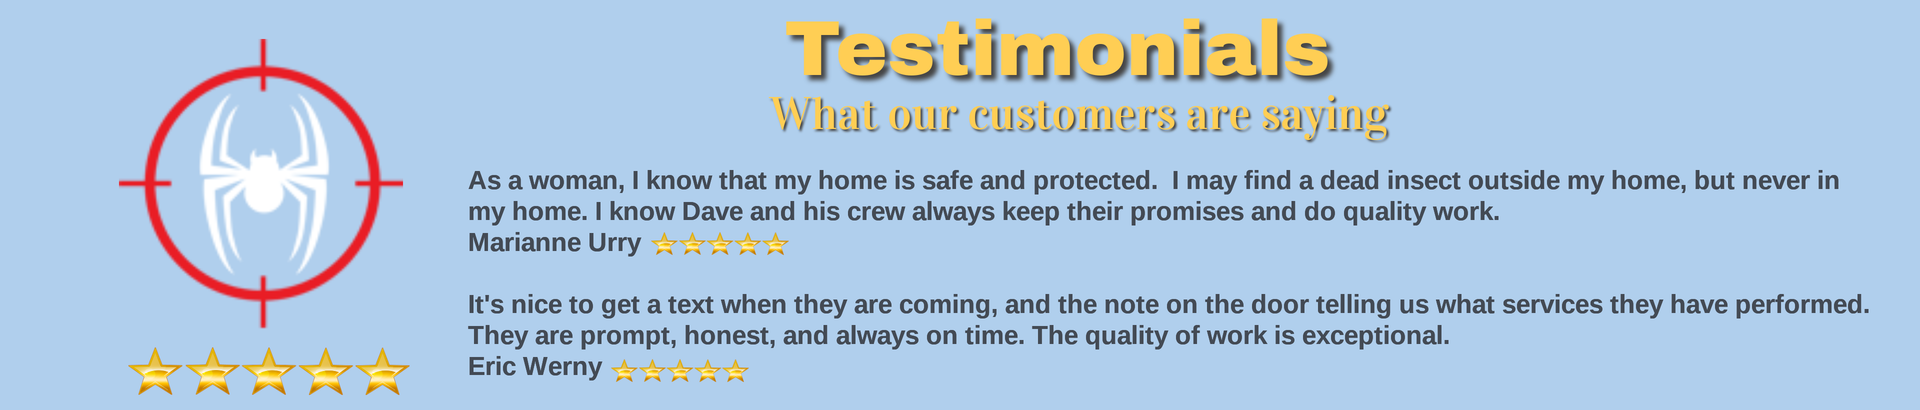 Testimonials what our customers are saying